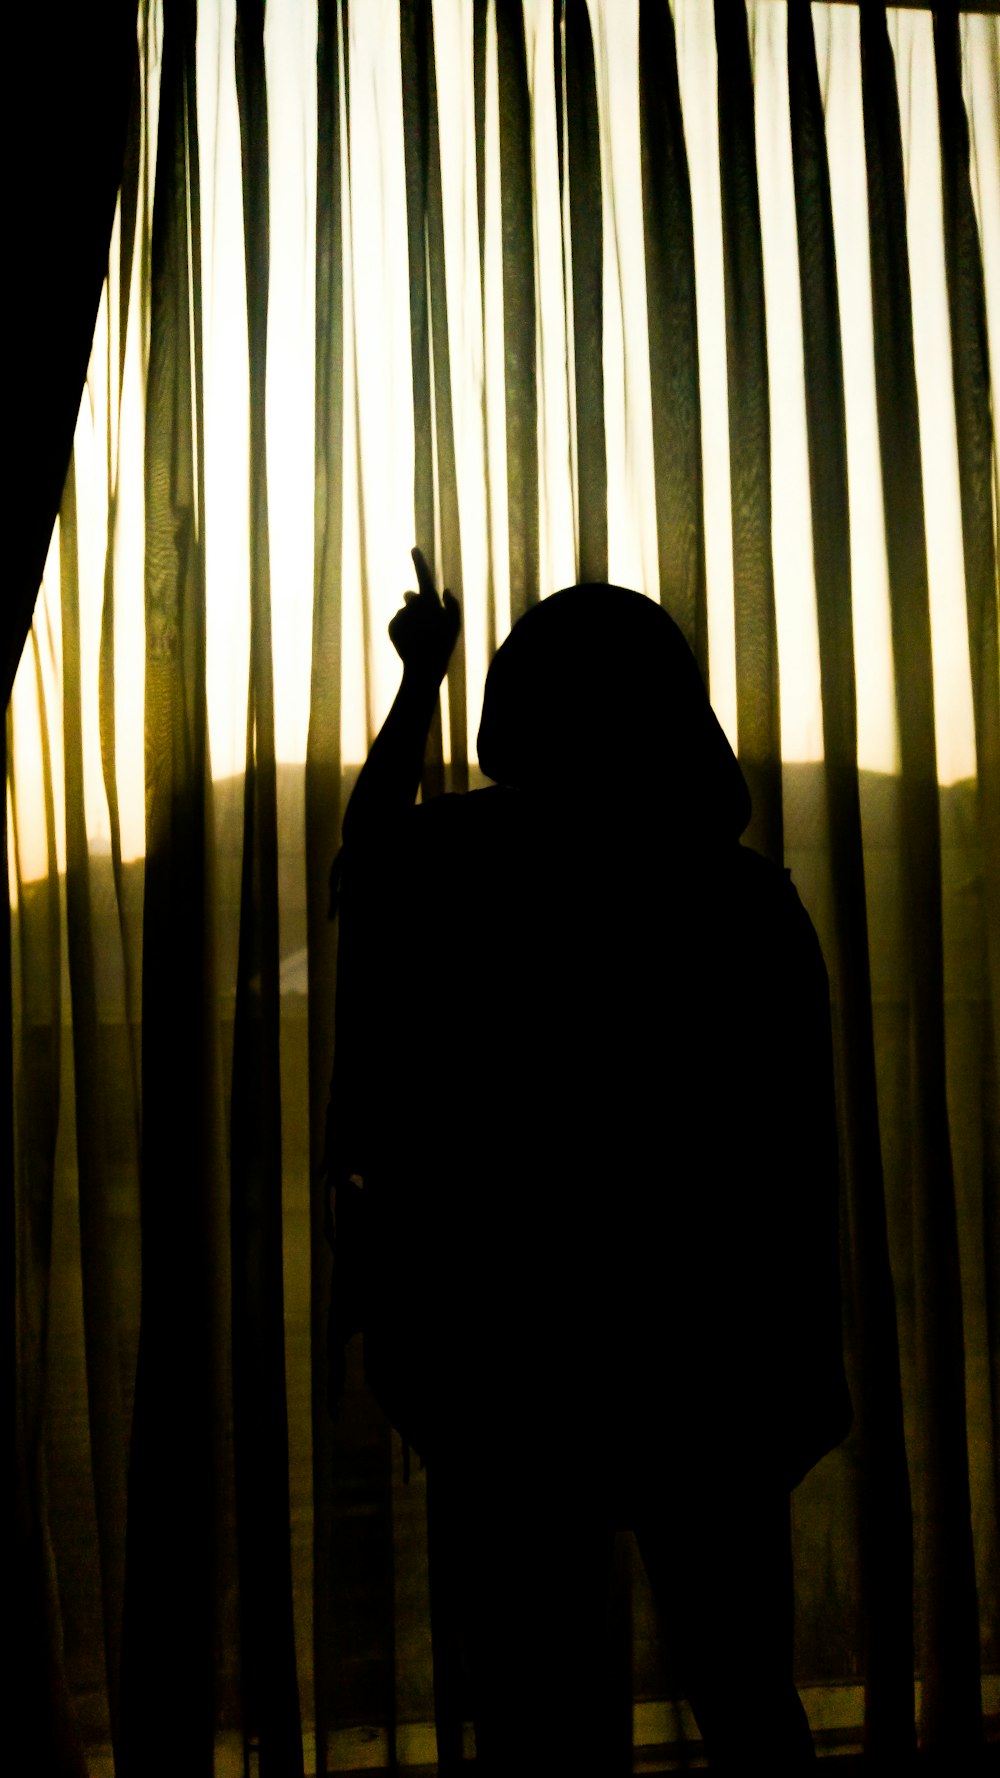 silhouette of person standing near window curtain